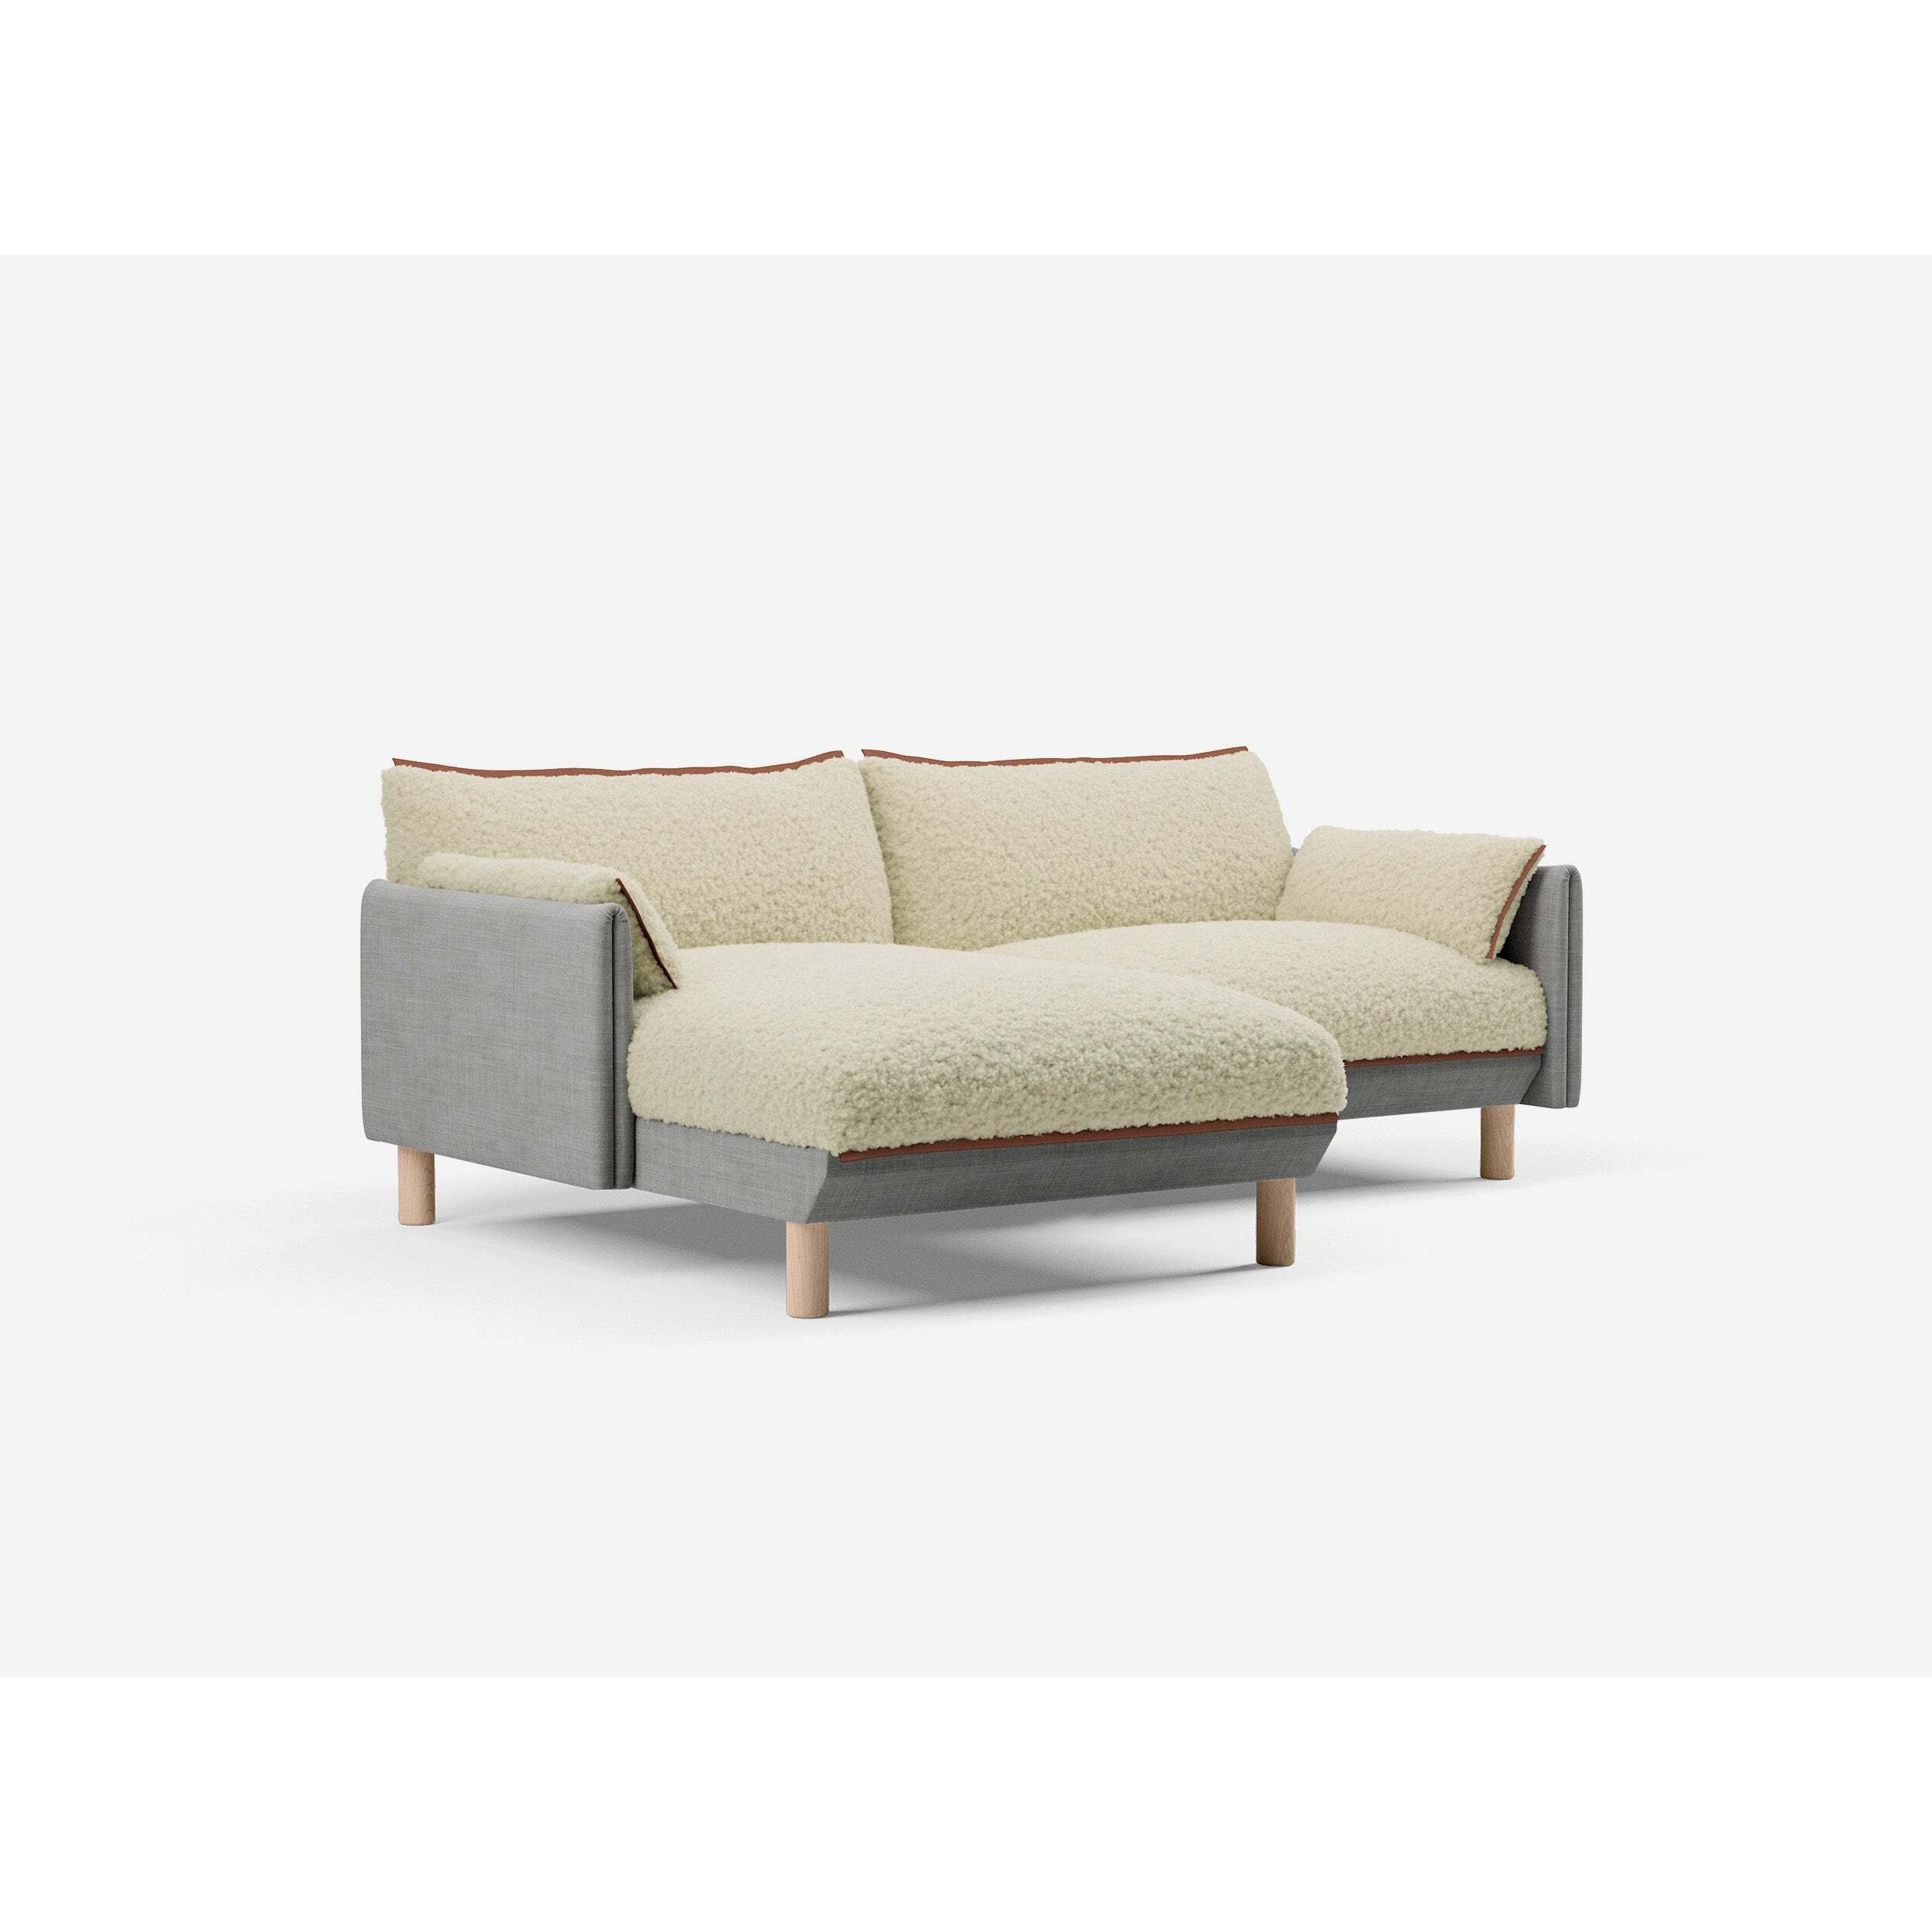 3 Seater LH Chaise Sofa - Light Grey Weave - image 1